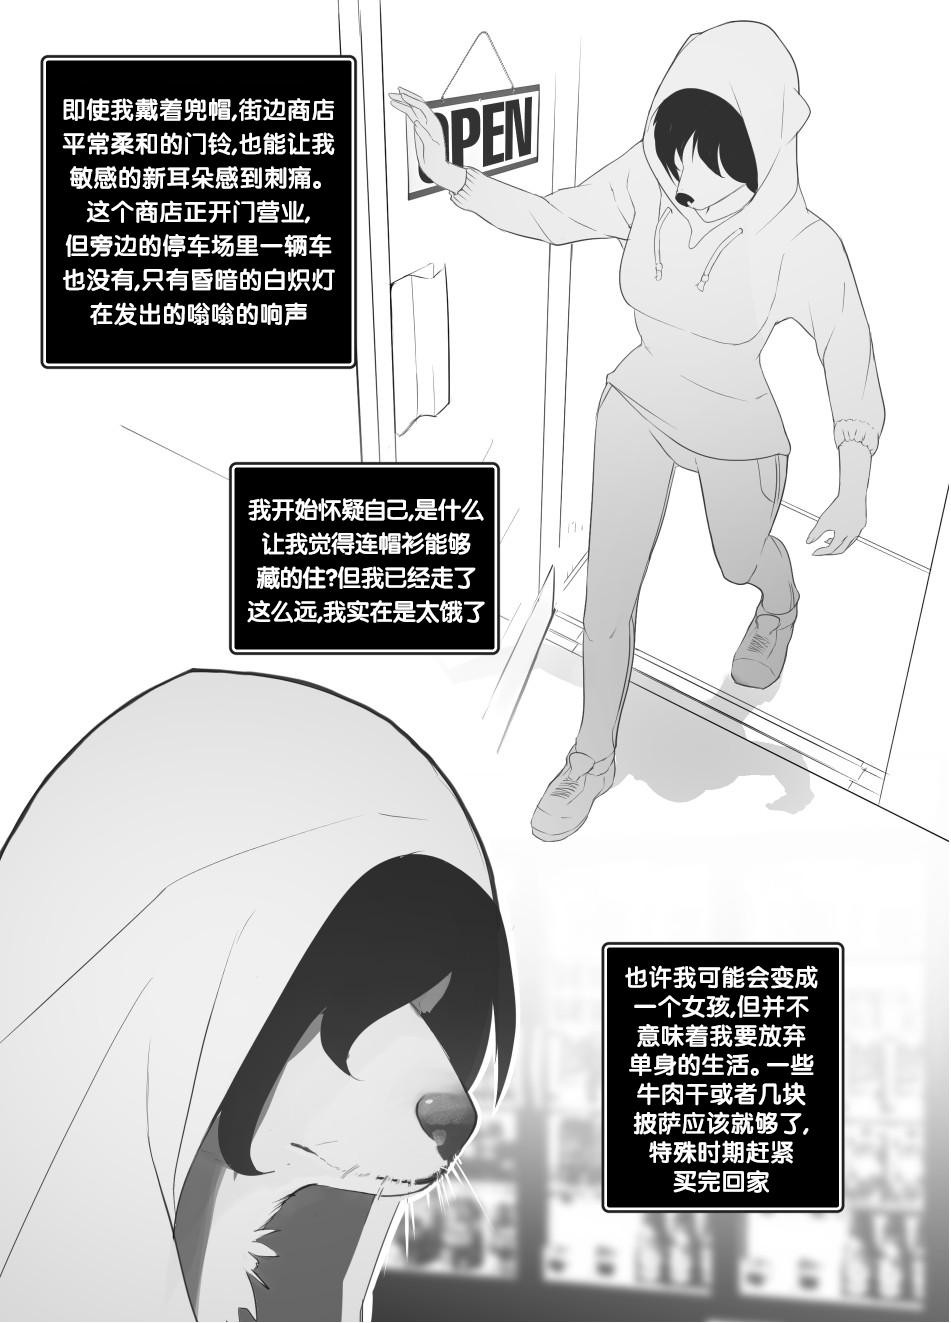 [Corablue] The Cell CH0 [Chinese] [梅水瓶汉化] 